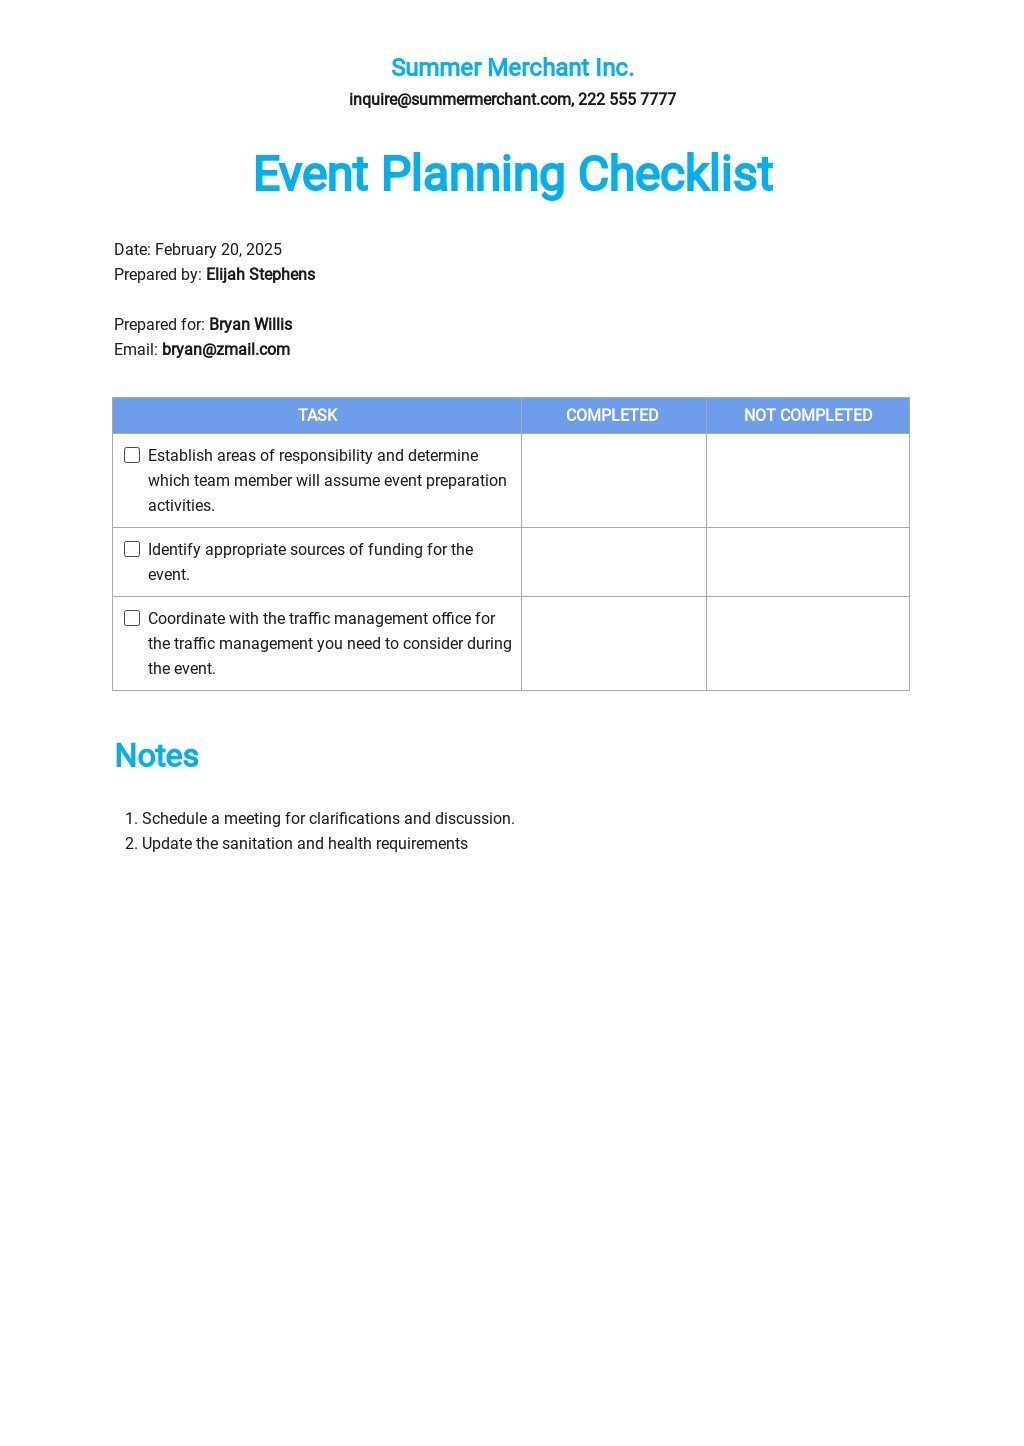 5-event-planning-checklist-templates-free-downloads-template